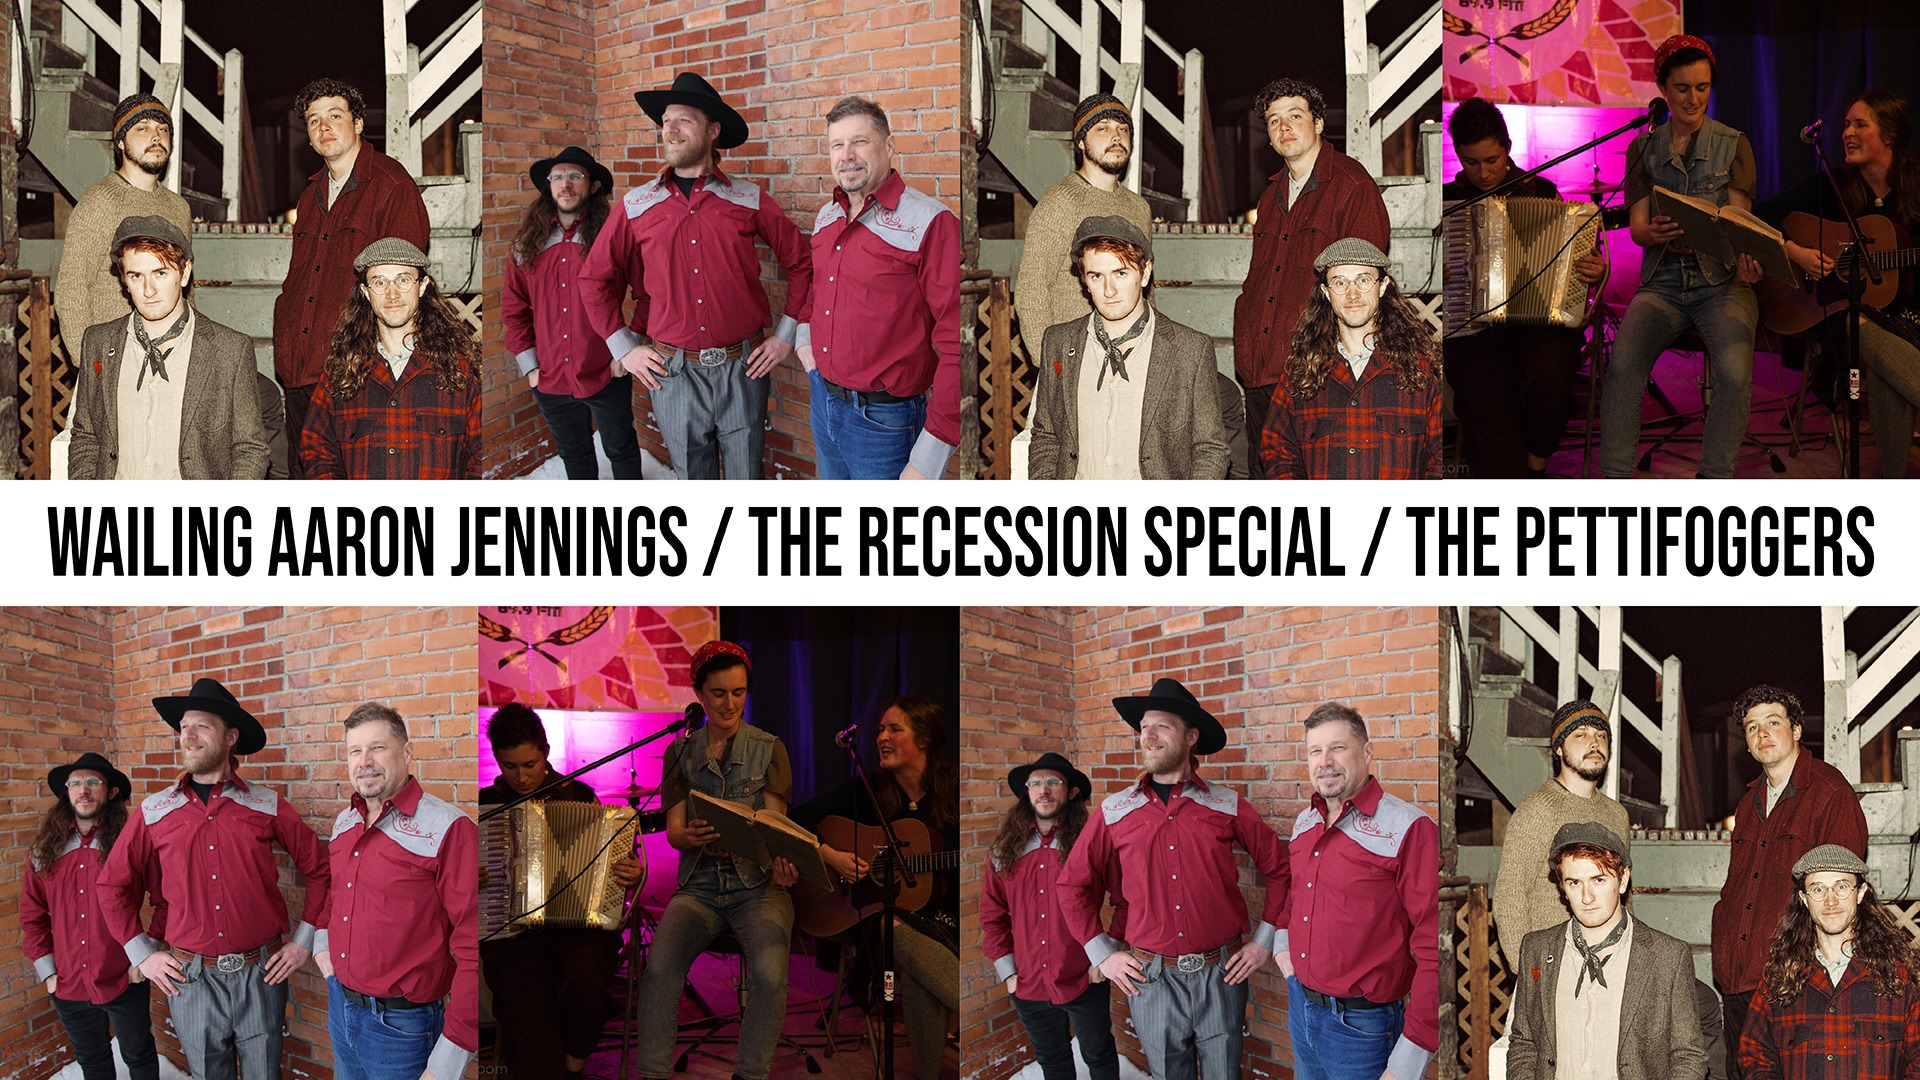 Wailing Aaron Jennings & Co. - The Recession Special - The Pettifoggers